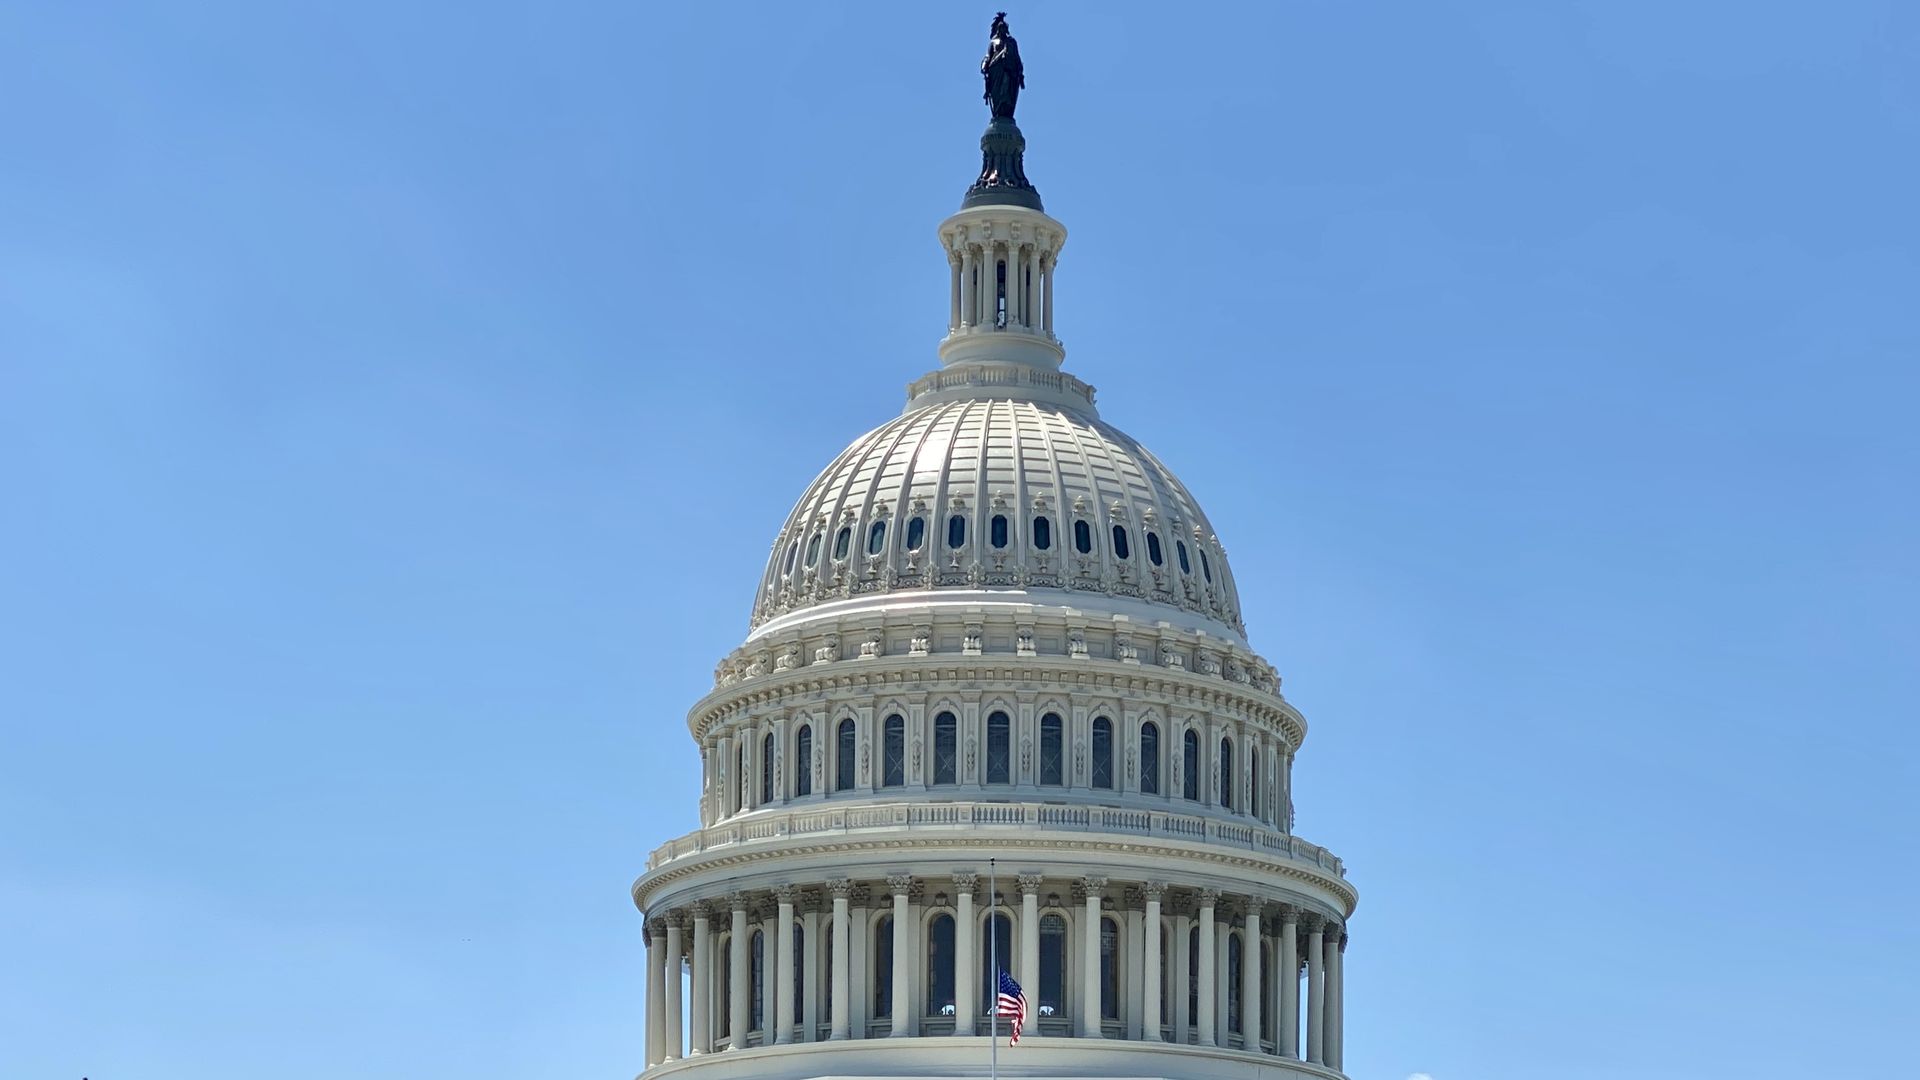 A photo of the U.S. Capitol Dome in front of a clear sky.